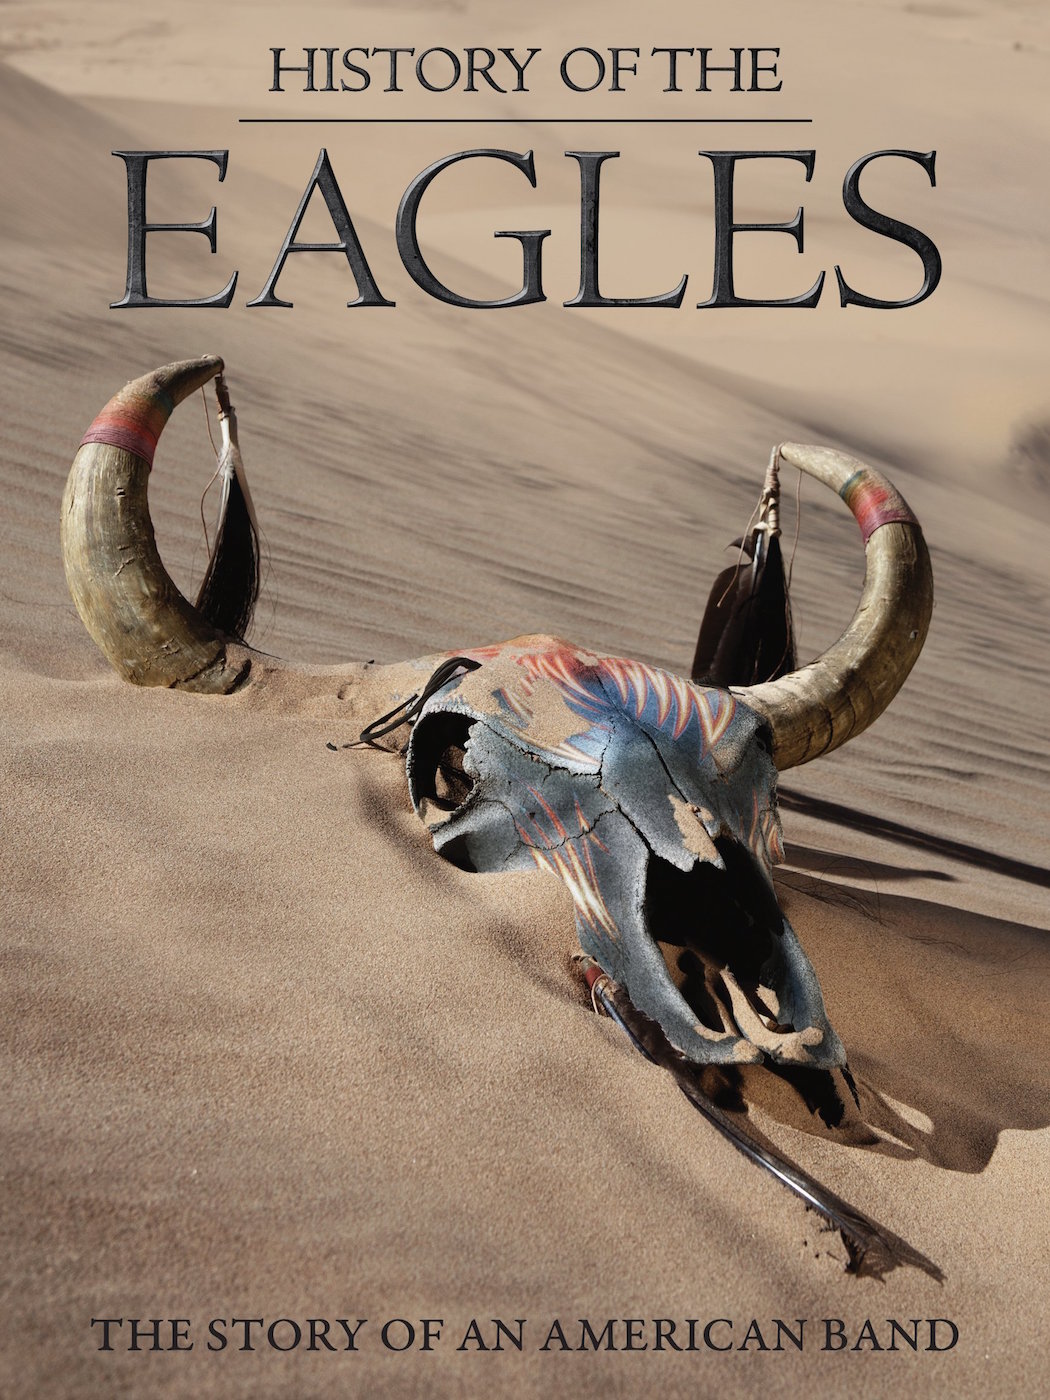 The Eagles - History Of The Eagles - DVD (2013)